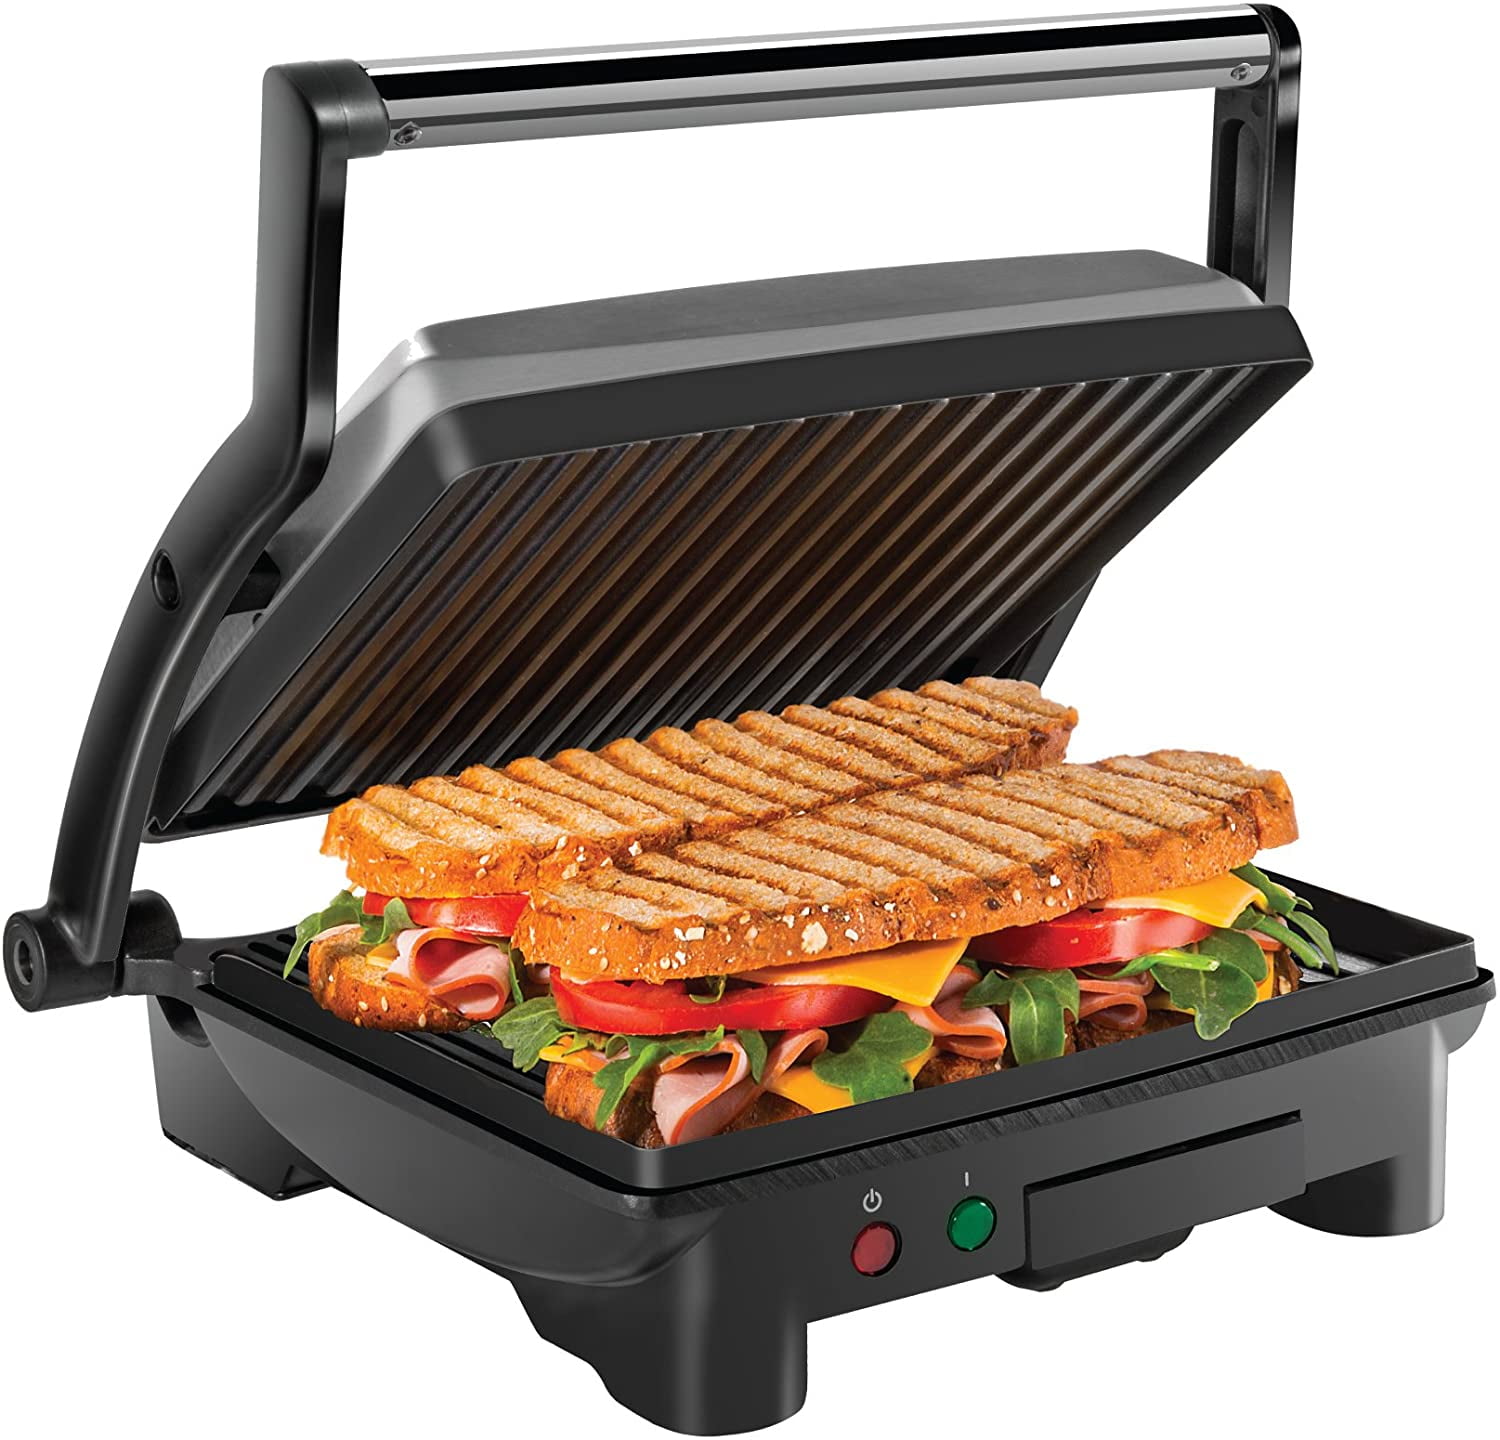 Steel, Press, for 3-in-1 New Panini Grill 4-Slice Press - Grill, & Flat Chefman Electric Stainless Non-Stick Opens